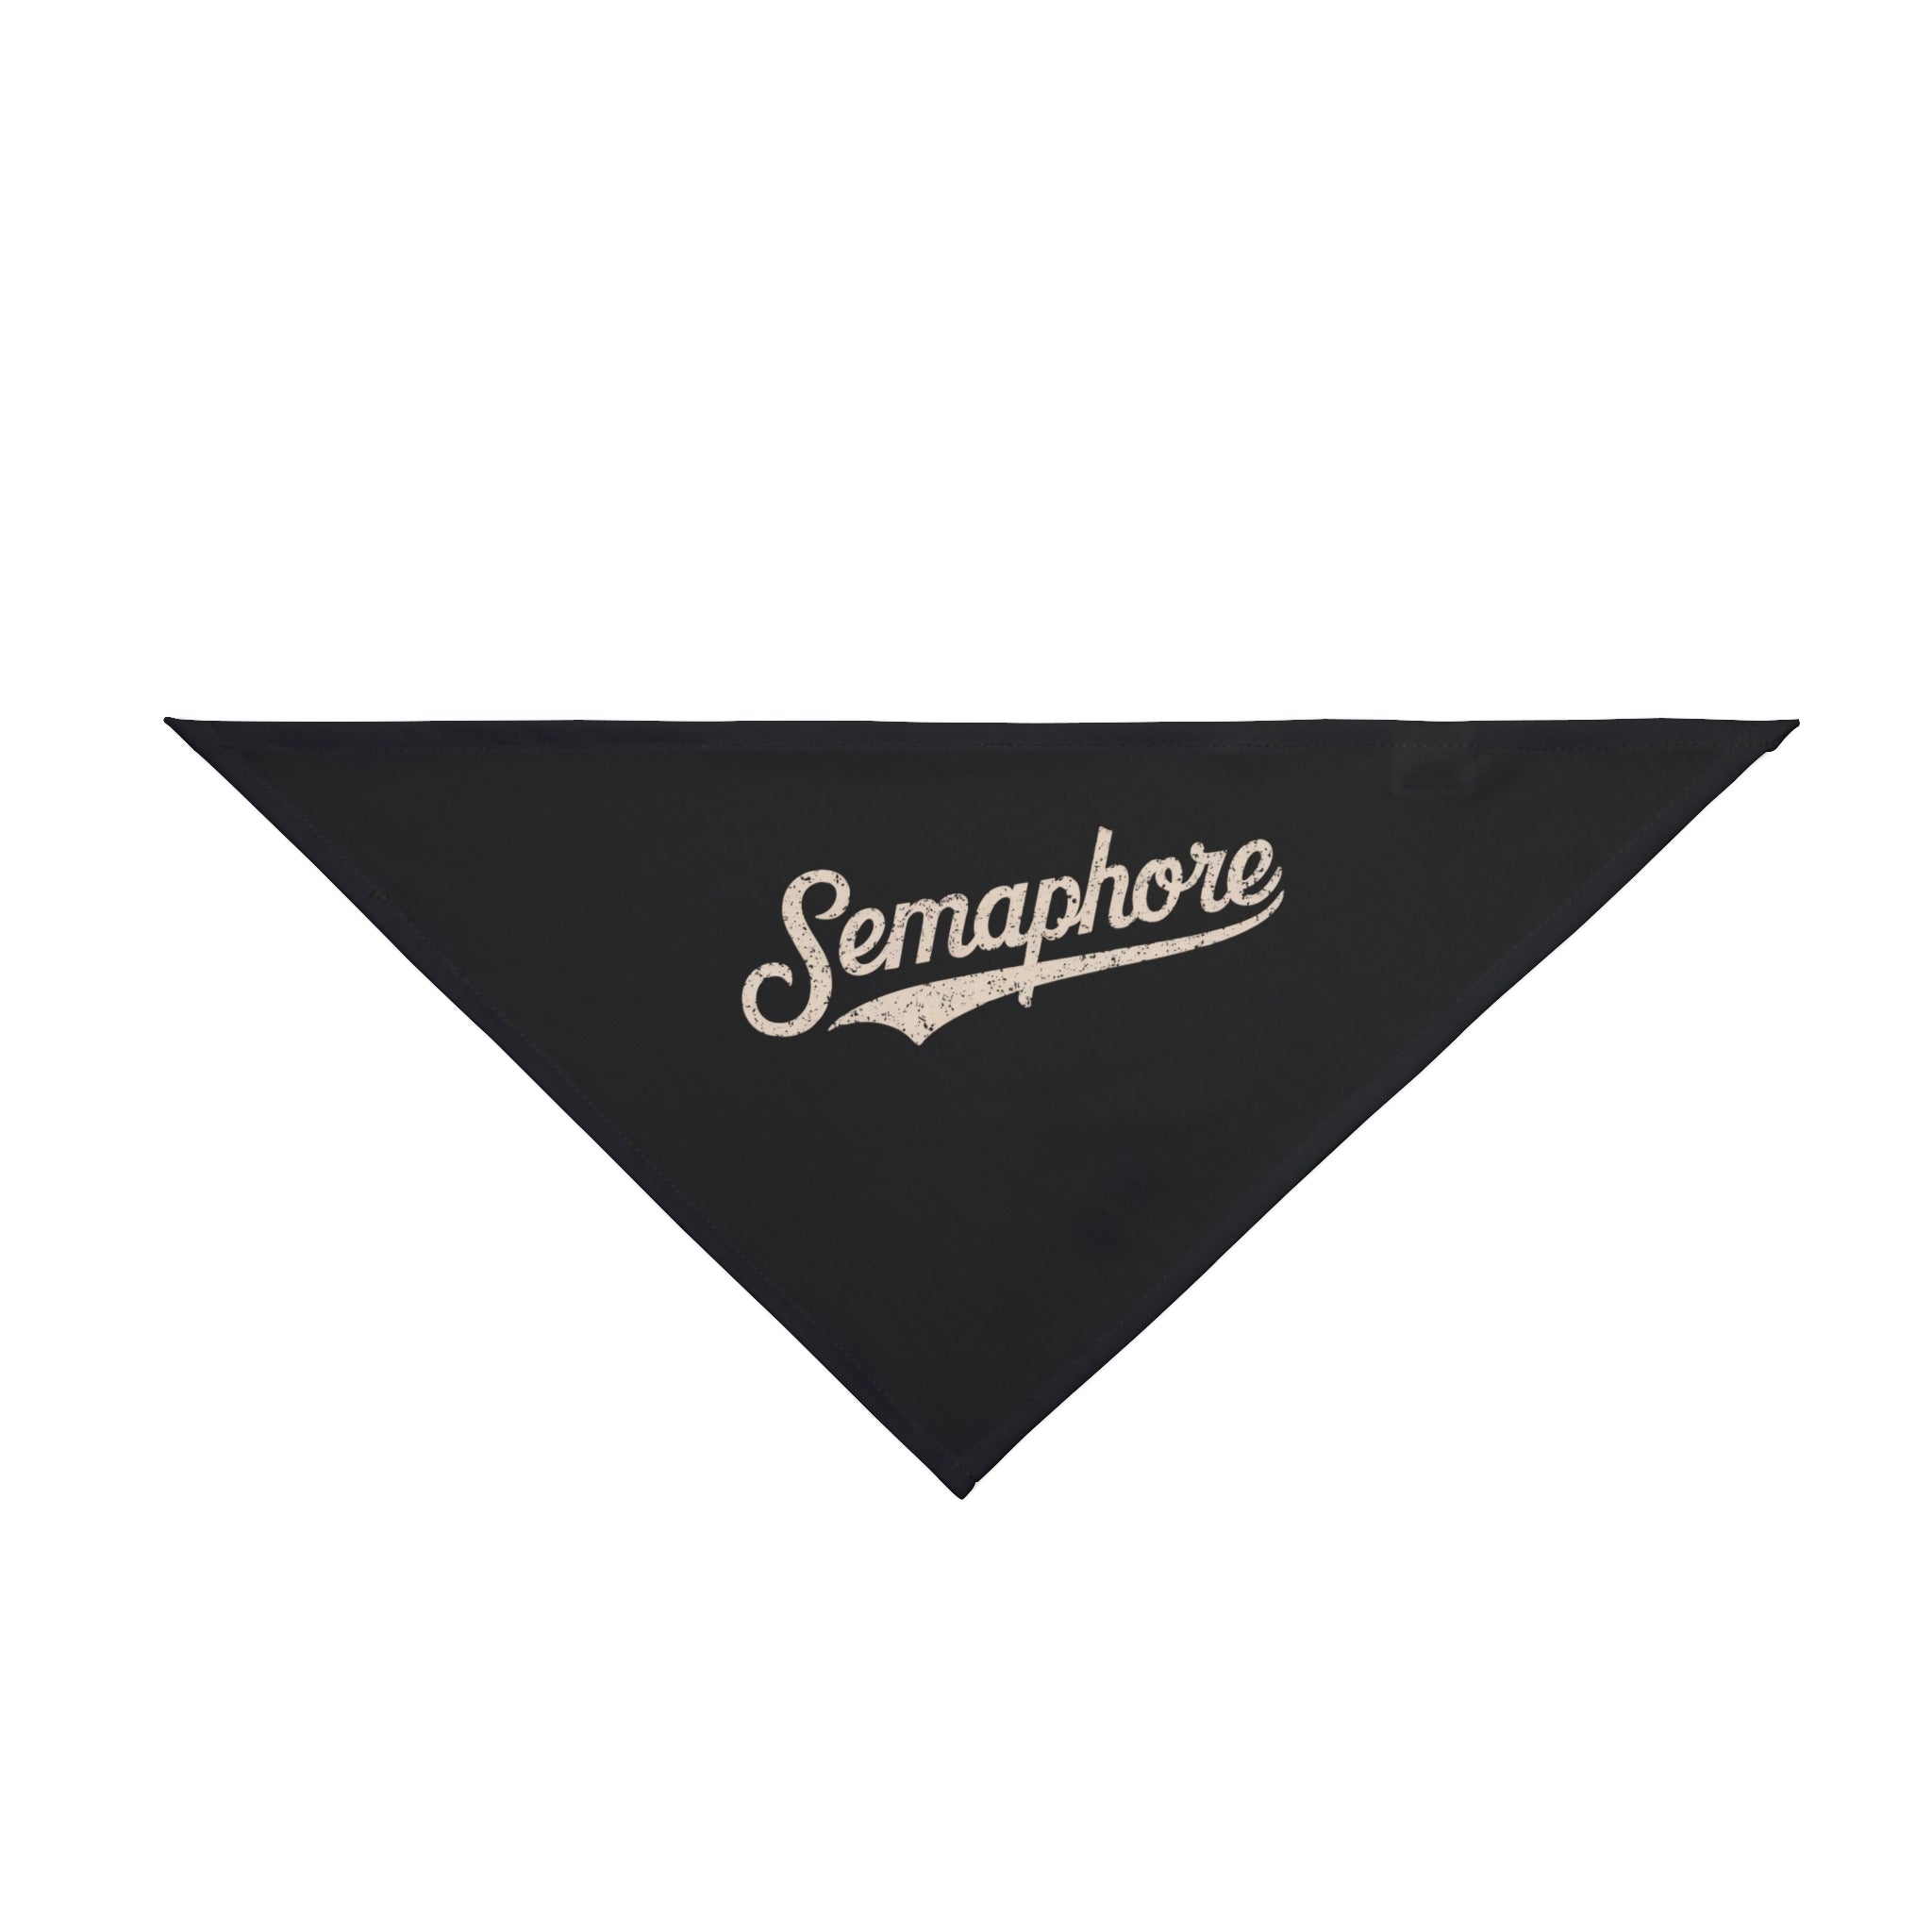 A Semaphore - Pet Bandana in black, featuring the word "Semaphore" written in white script across the center. Its soft material ensures comfort against your pet's skin while sporting the stylish Semaphore design.